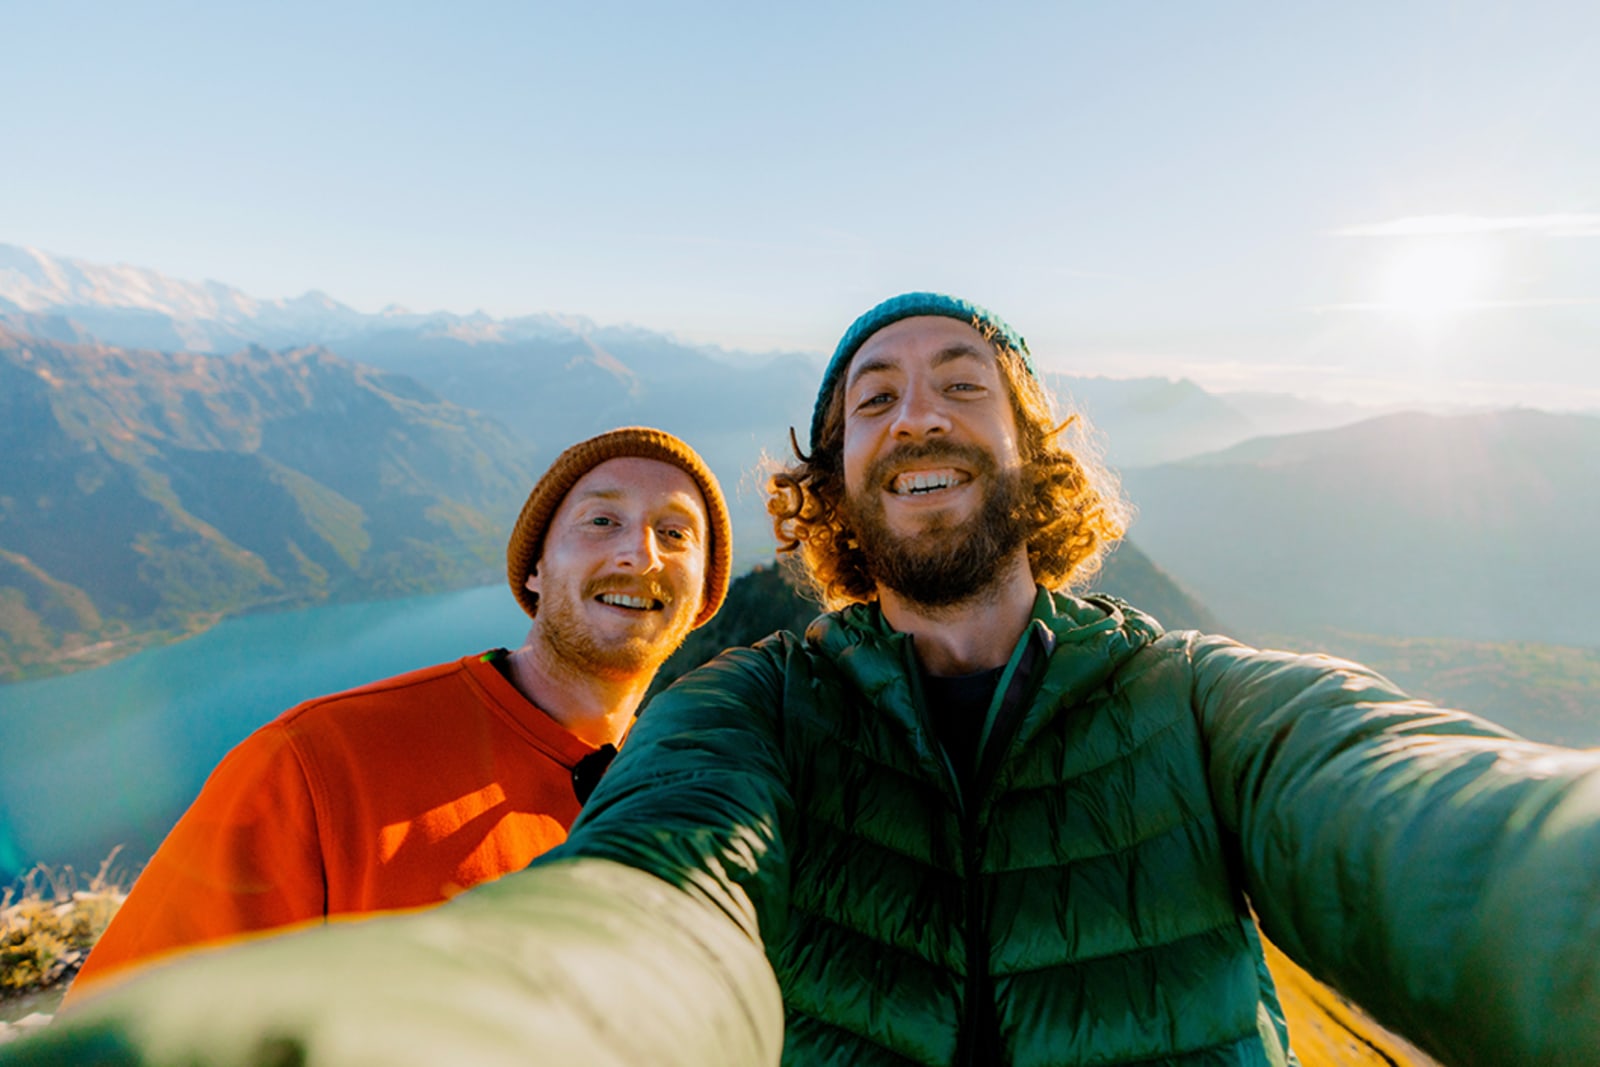 Hikers taking a selfie at the top of a mountain peak